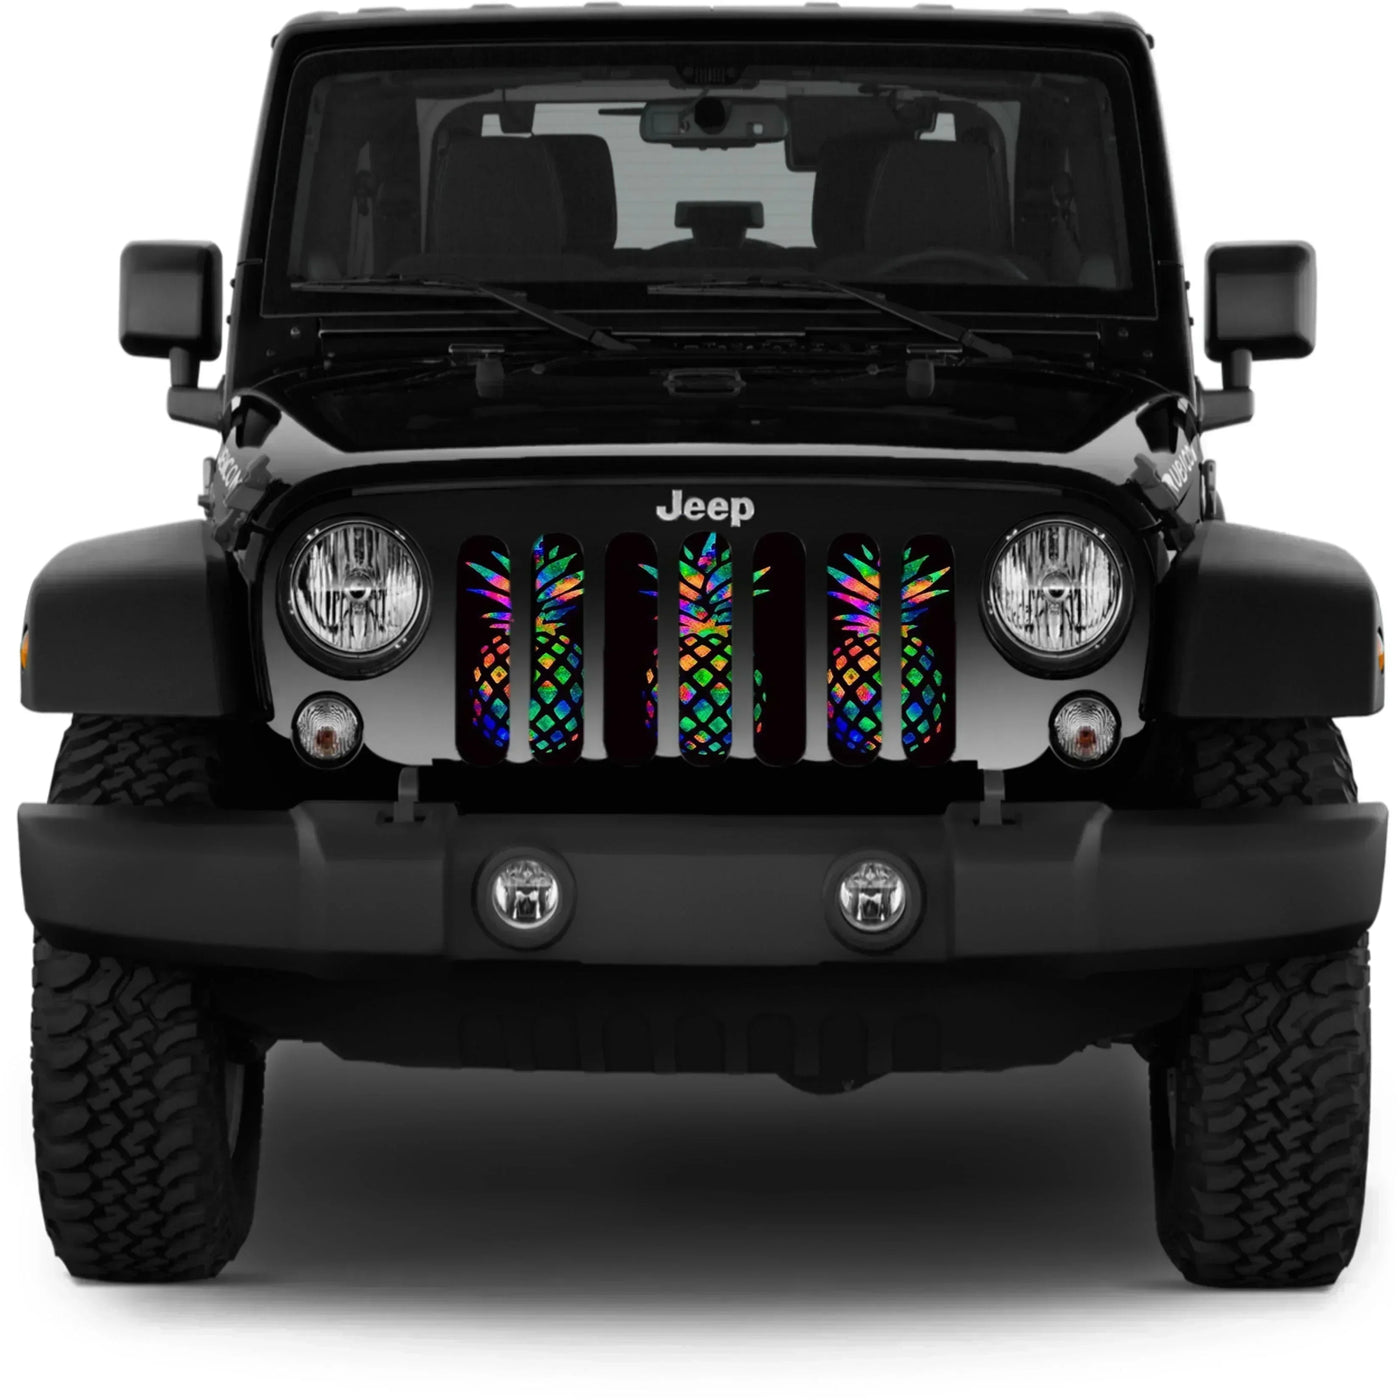 Bright Pineapple Jeep Grille Insert - Goats Trail